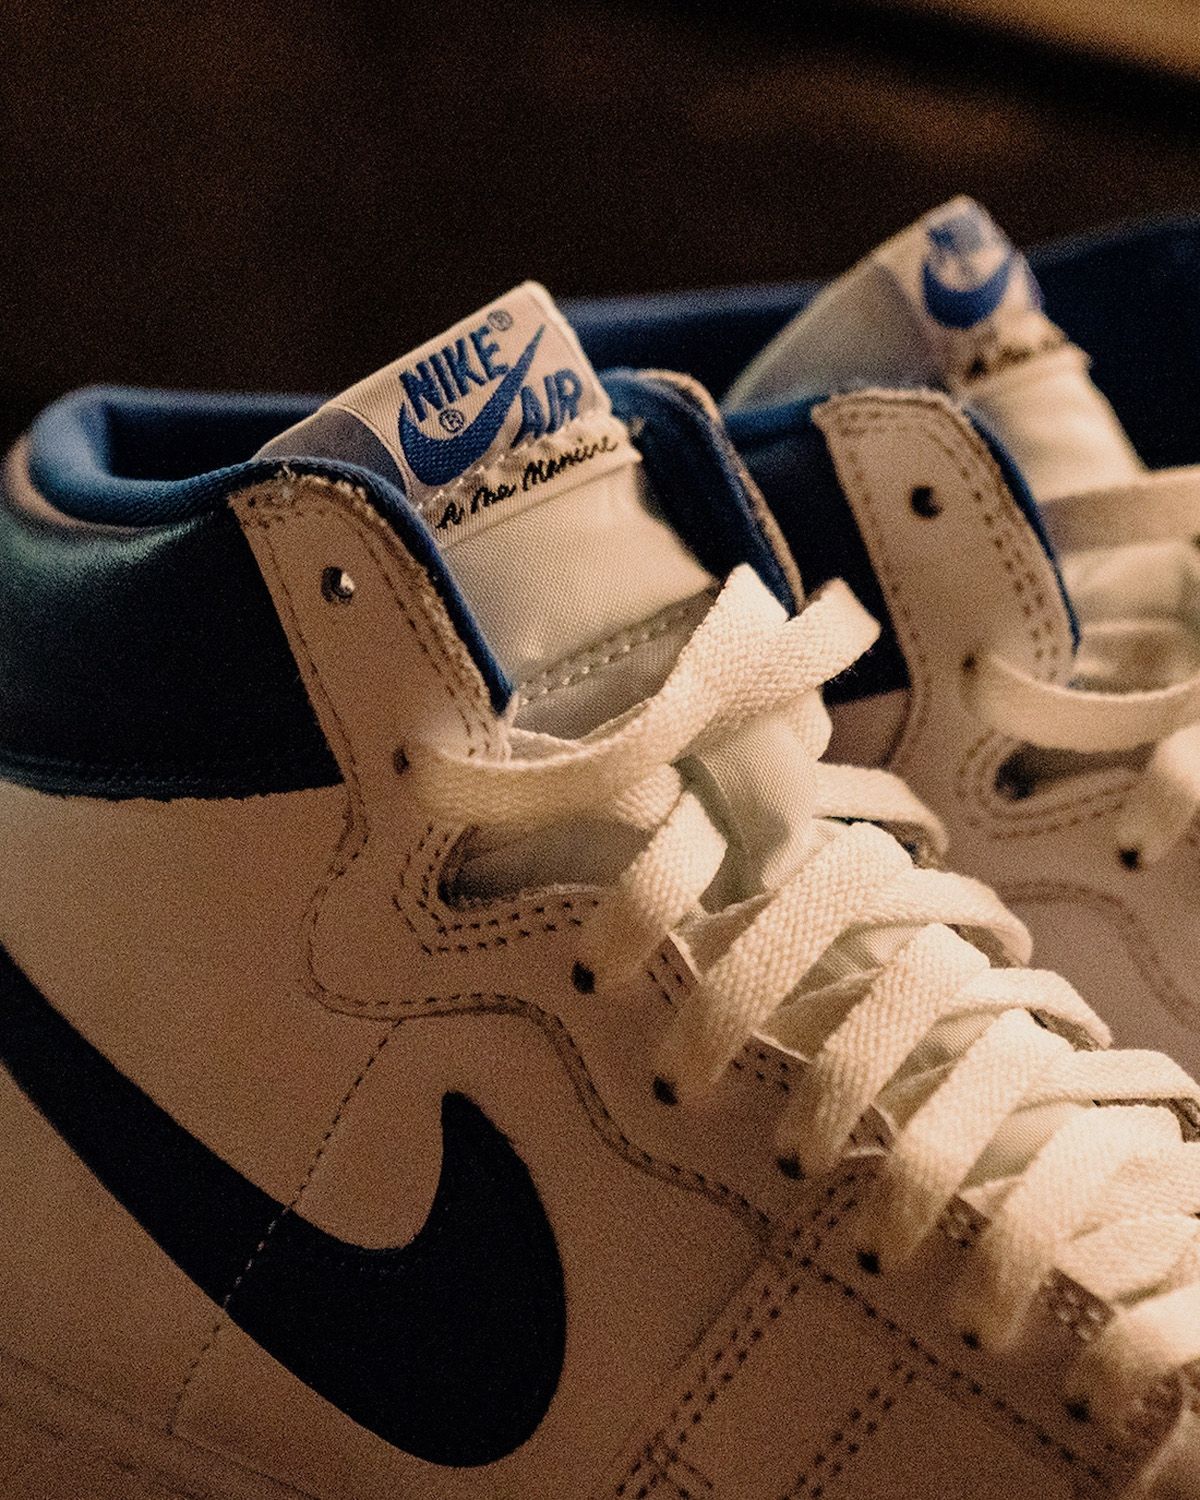 A Ma Maniére x Nike Air Ship “Game Royal” is Limited to Just 2,300 